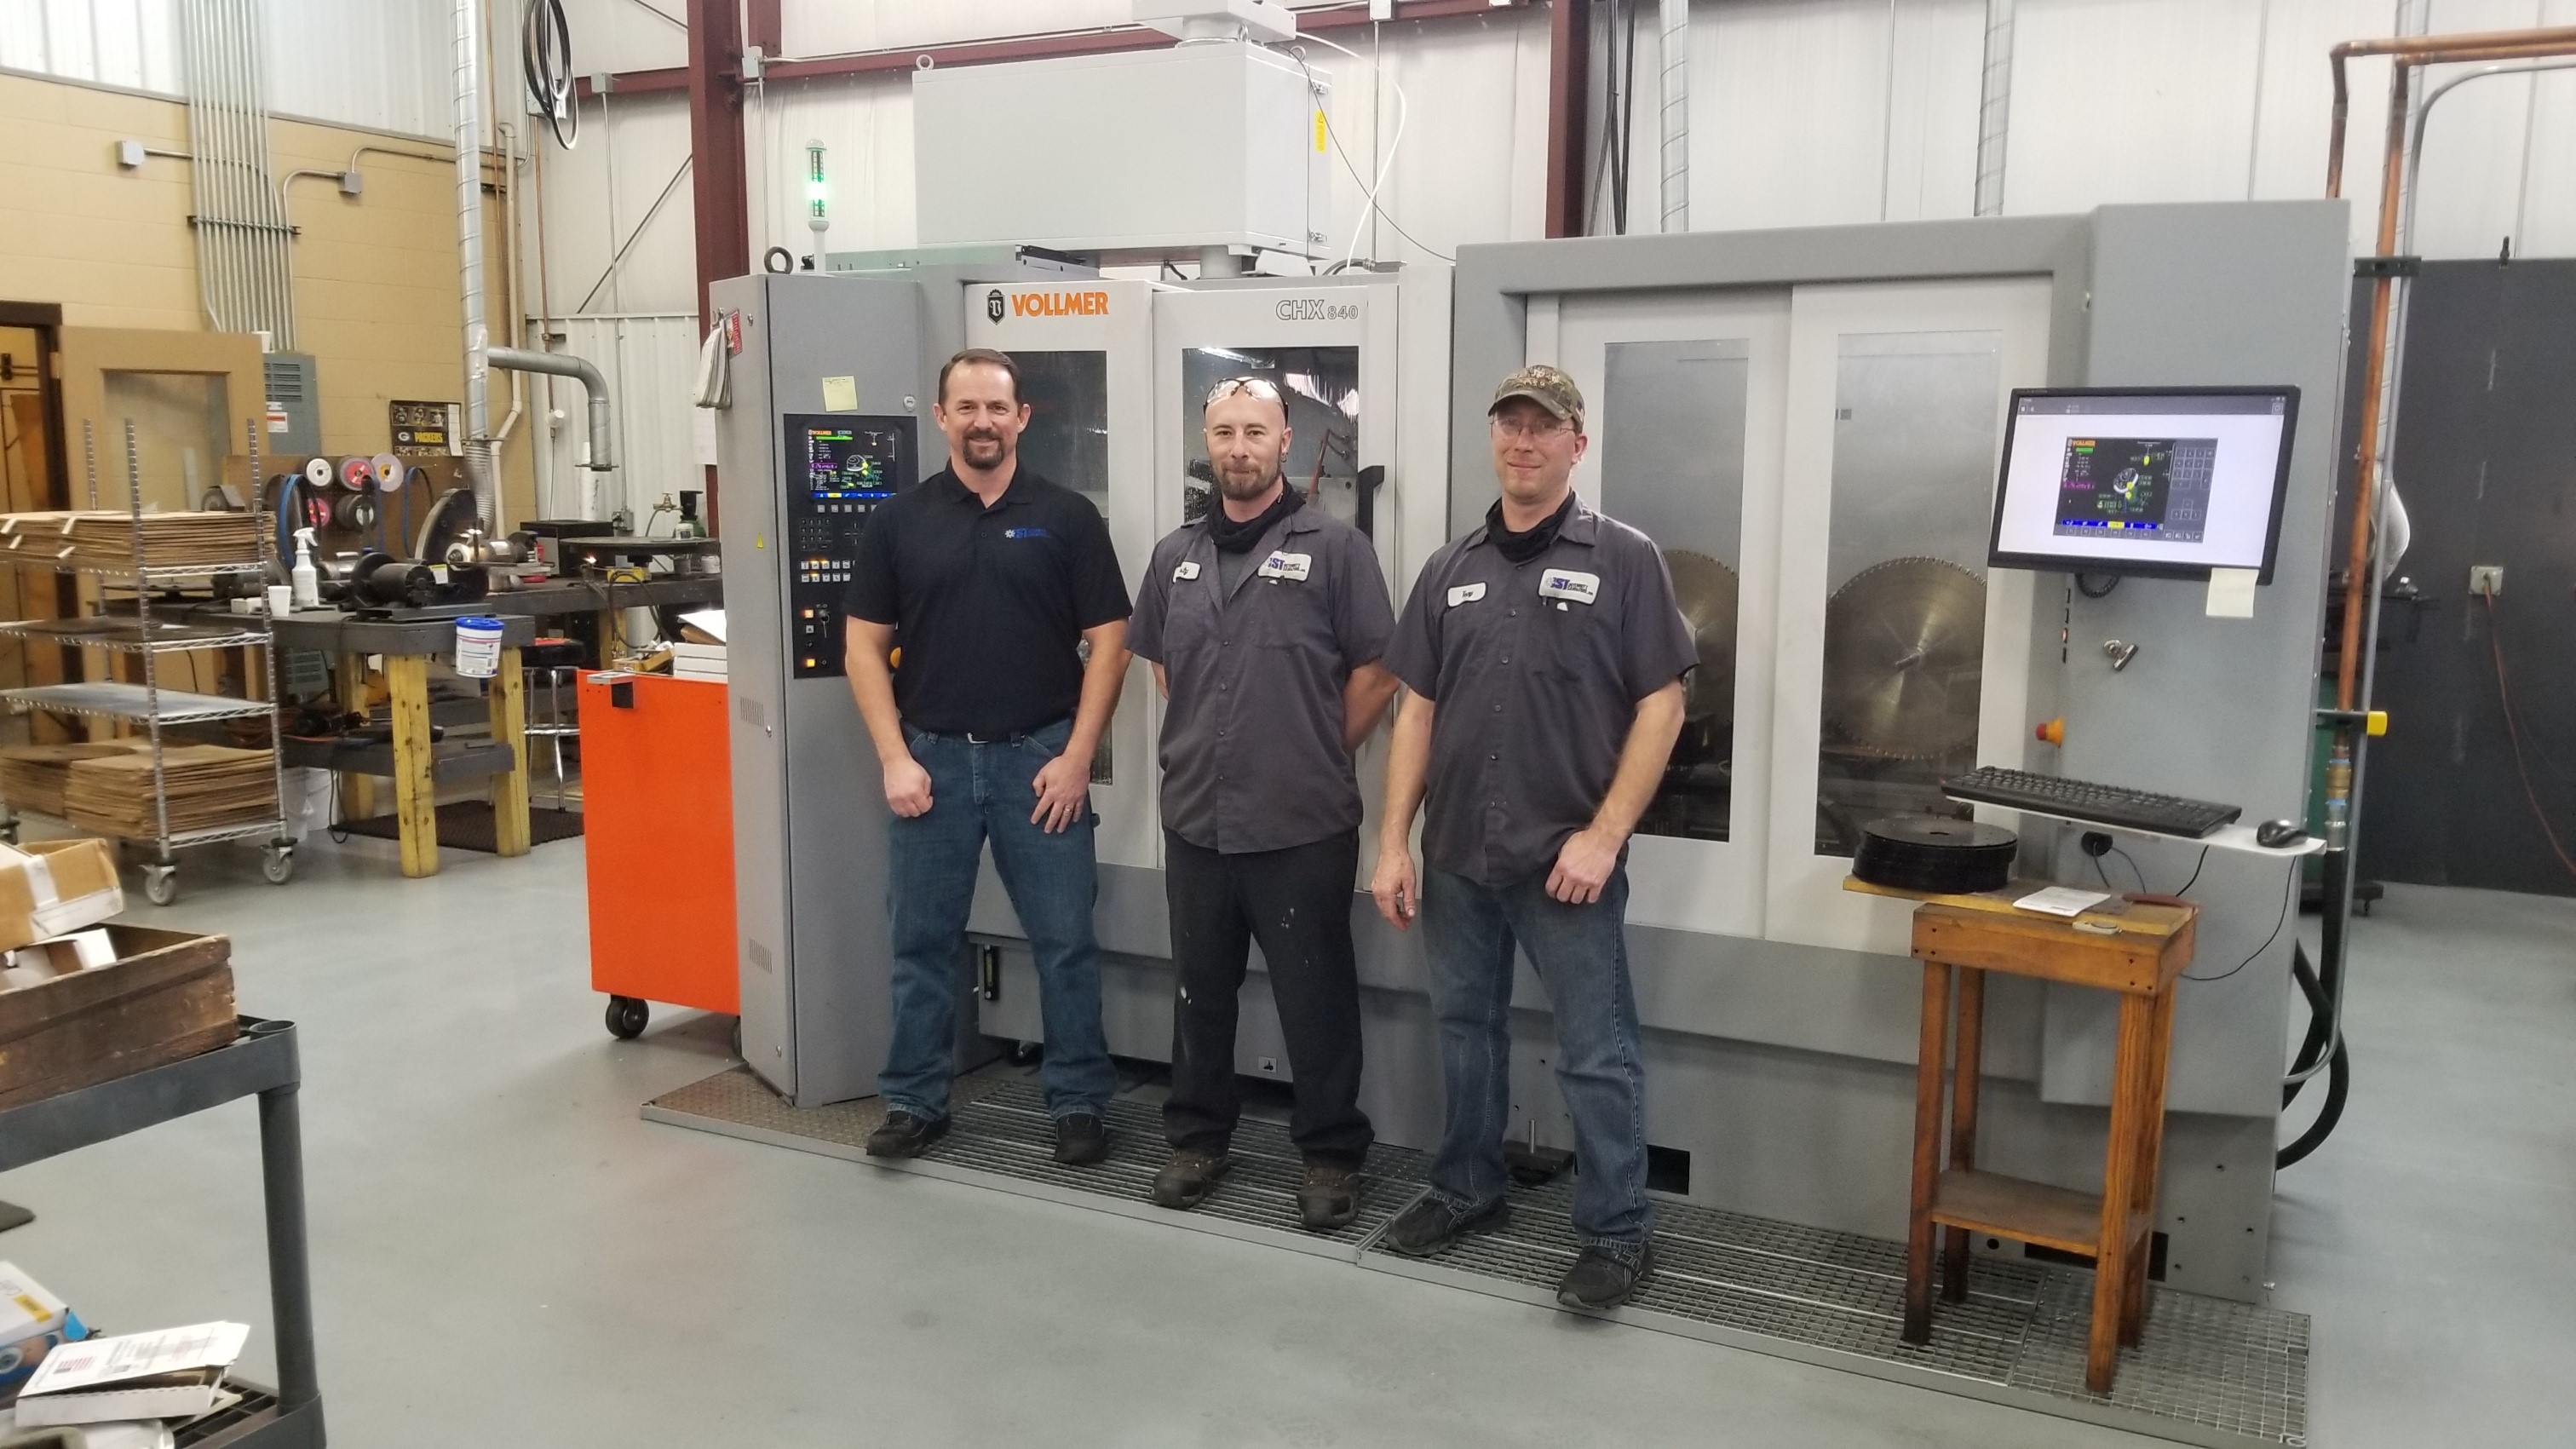 Paul Reetz (left) Owner of Integrity Saw & Tool with machine operators Marty Jagdfeld (middle) and Tony Lueck (right) in front of the VOLLMER CHX 840 + HS.